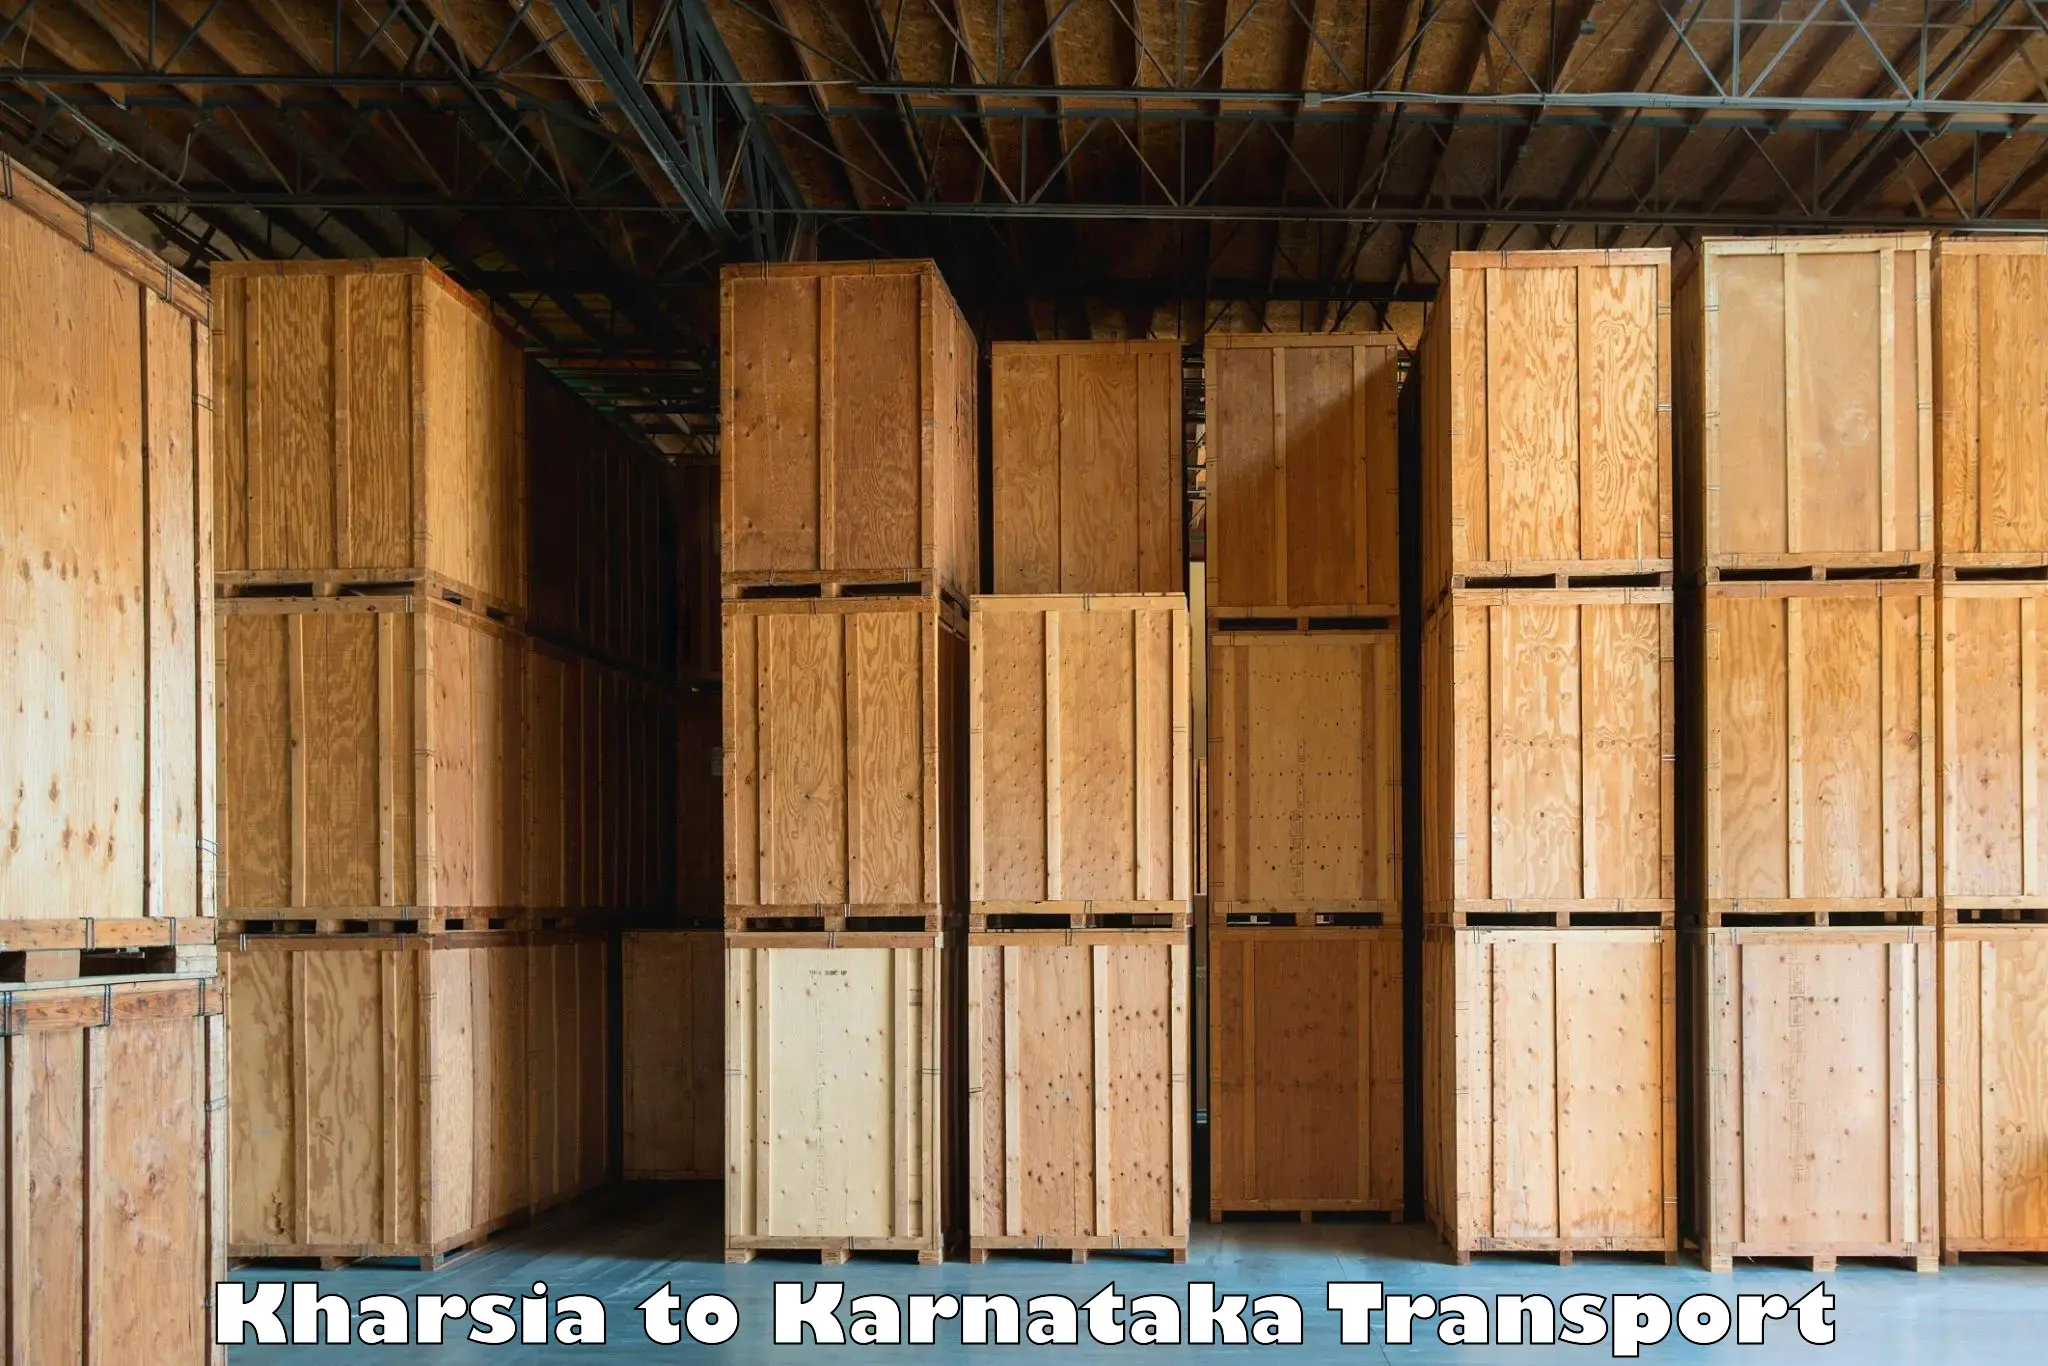 Daily parcel service transport in Kharsia to Mudarangady